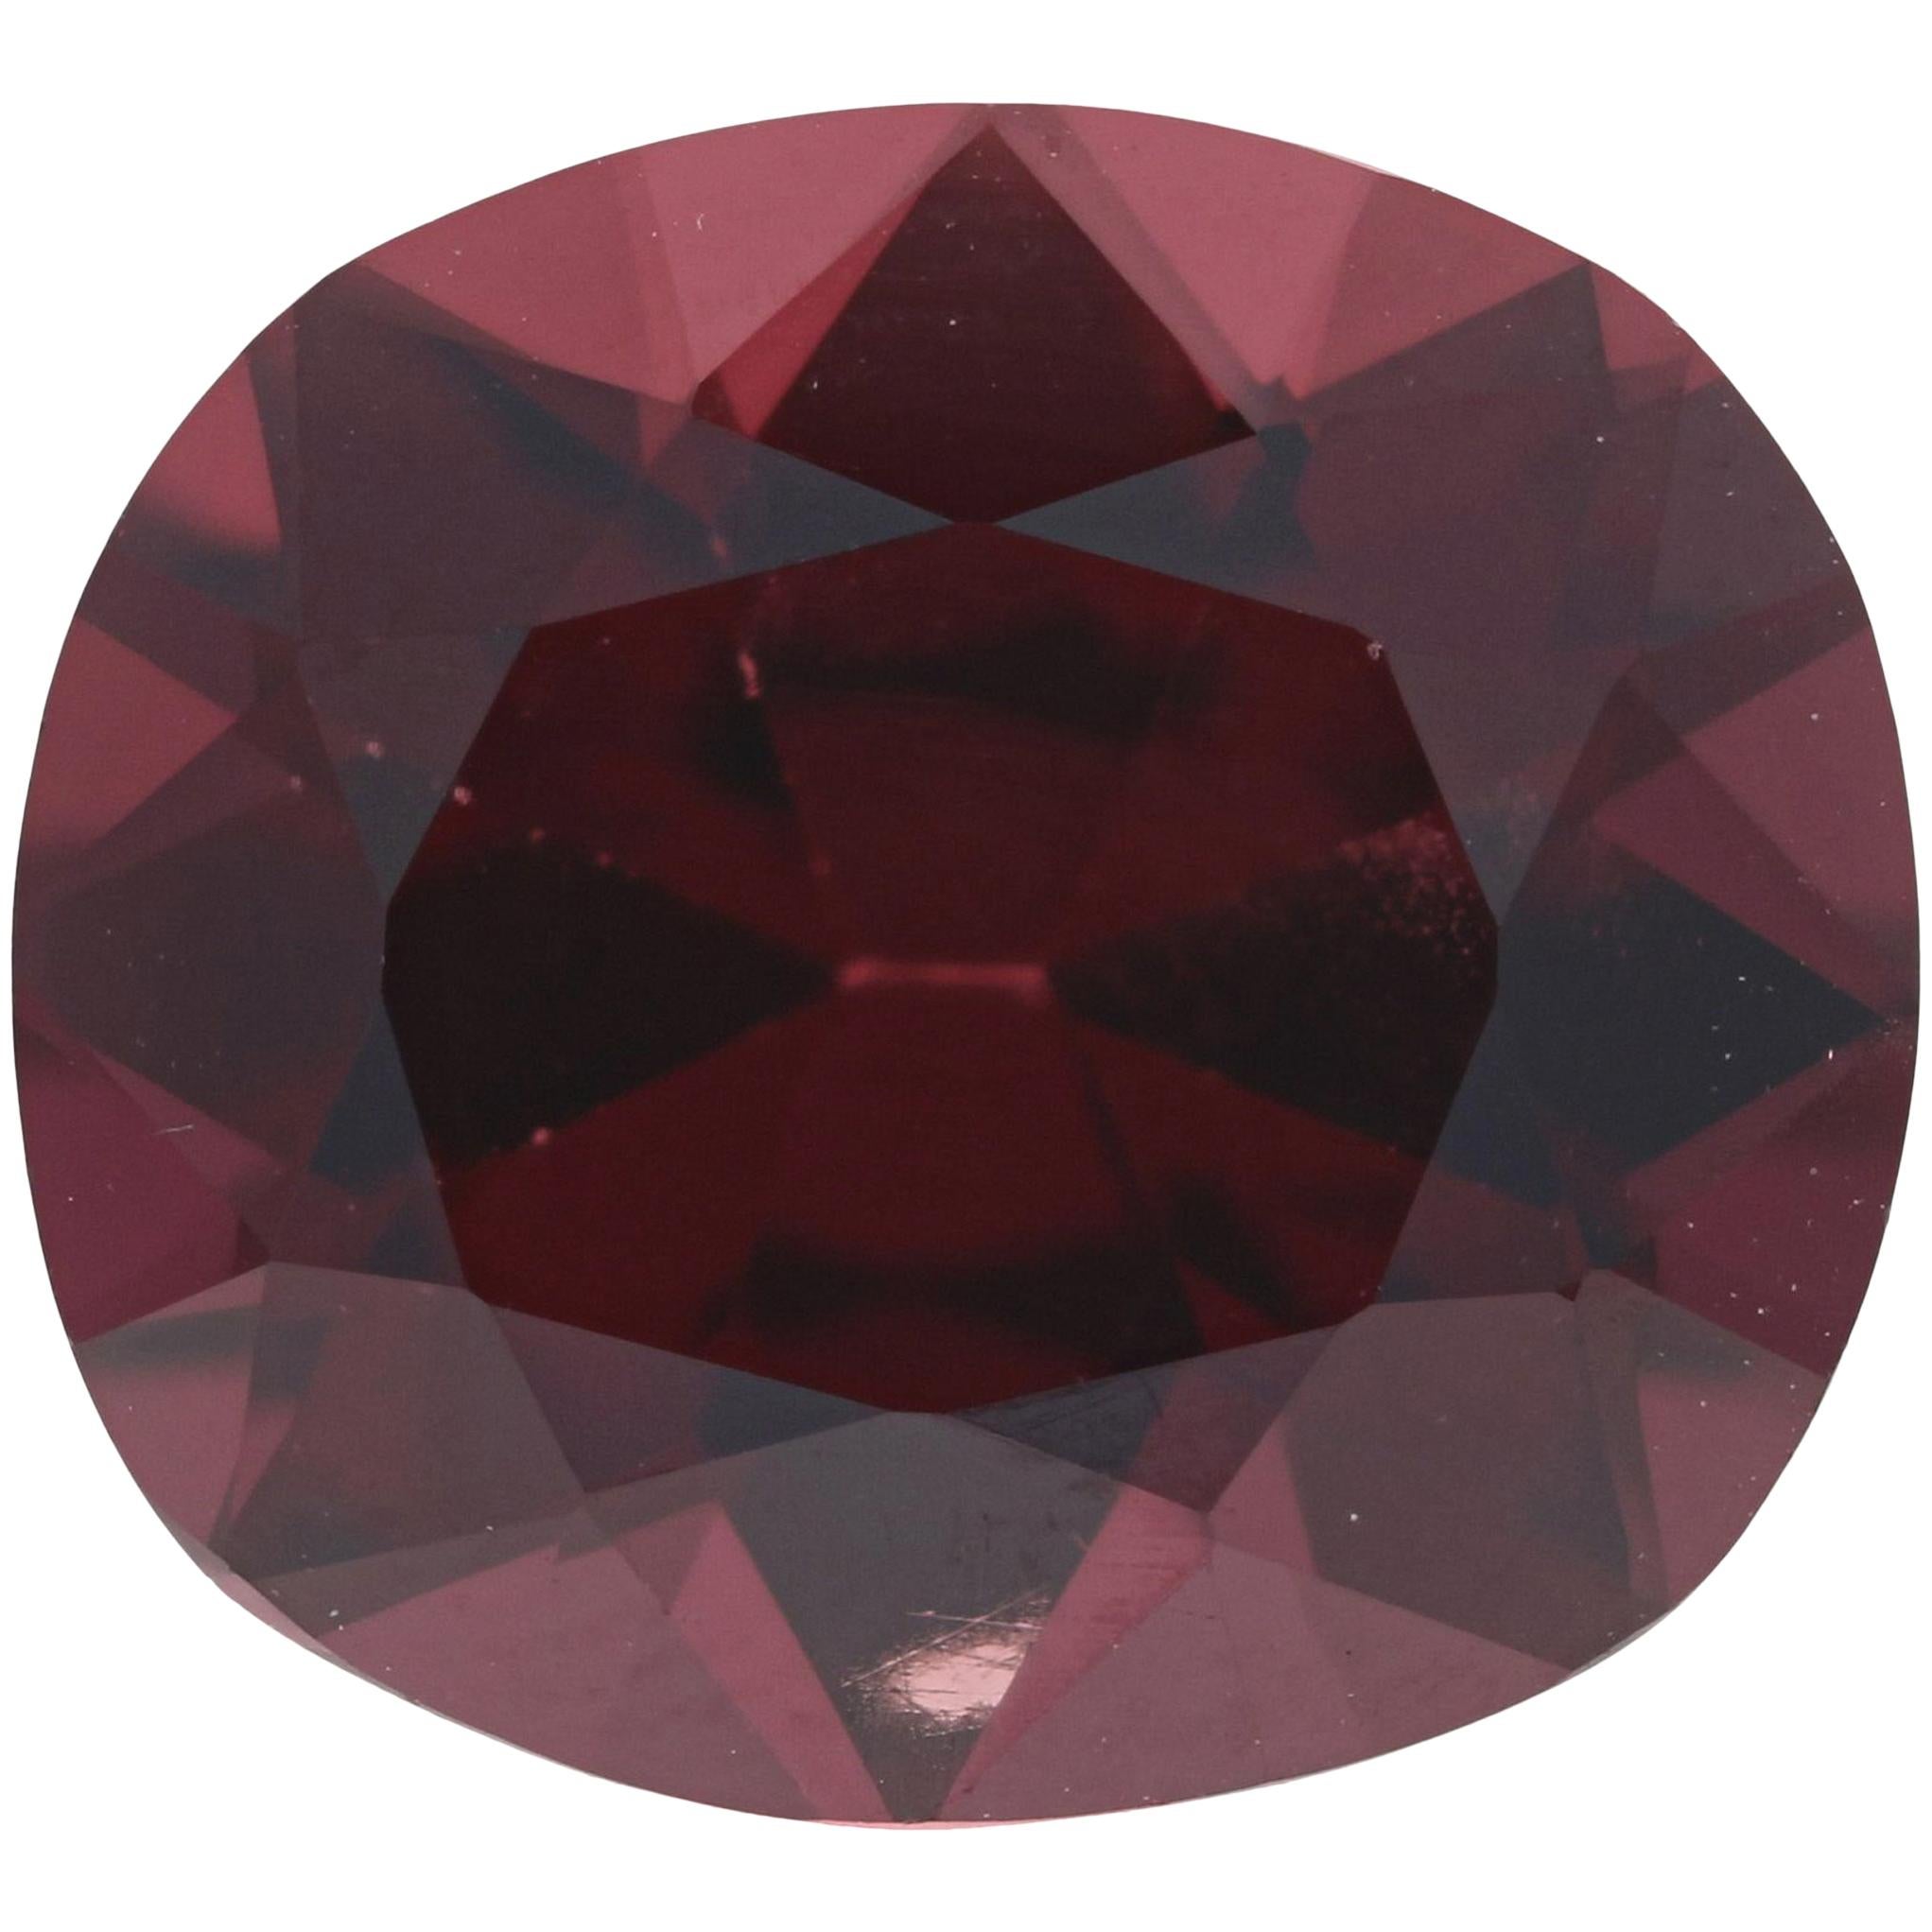 Loose Spinel, Cushion Cut 5.04 Carat Red Solitaire For Sale